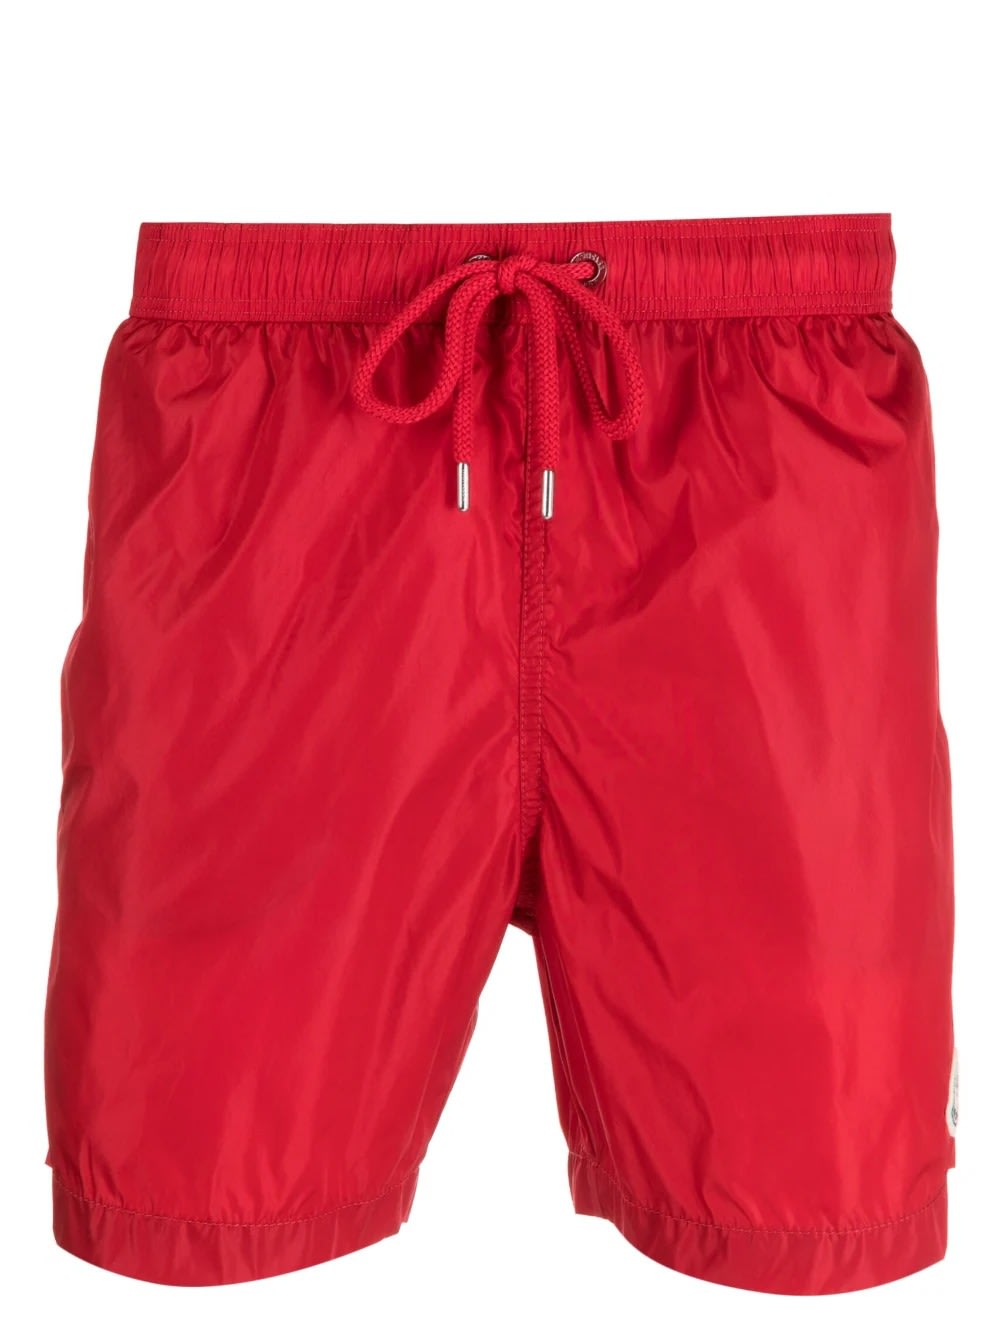 MONCLER RED SWIM SHORTS WITH LOGO